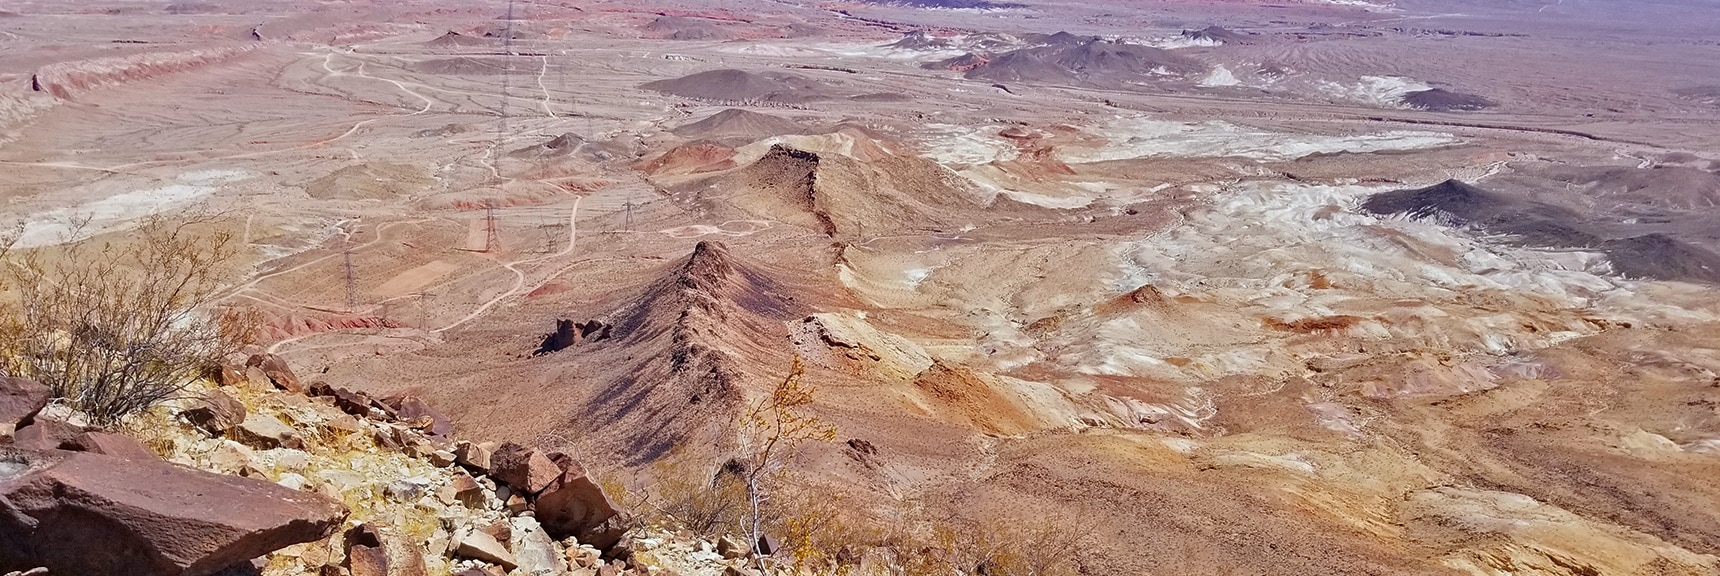 View Back Down the North Ridge of Lava Butte from the Summit | Lava Butte | Lake Mead National Recreation Area, Nevada